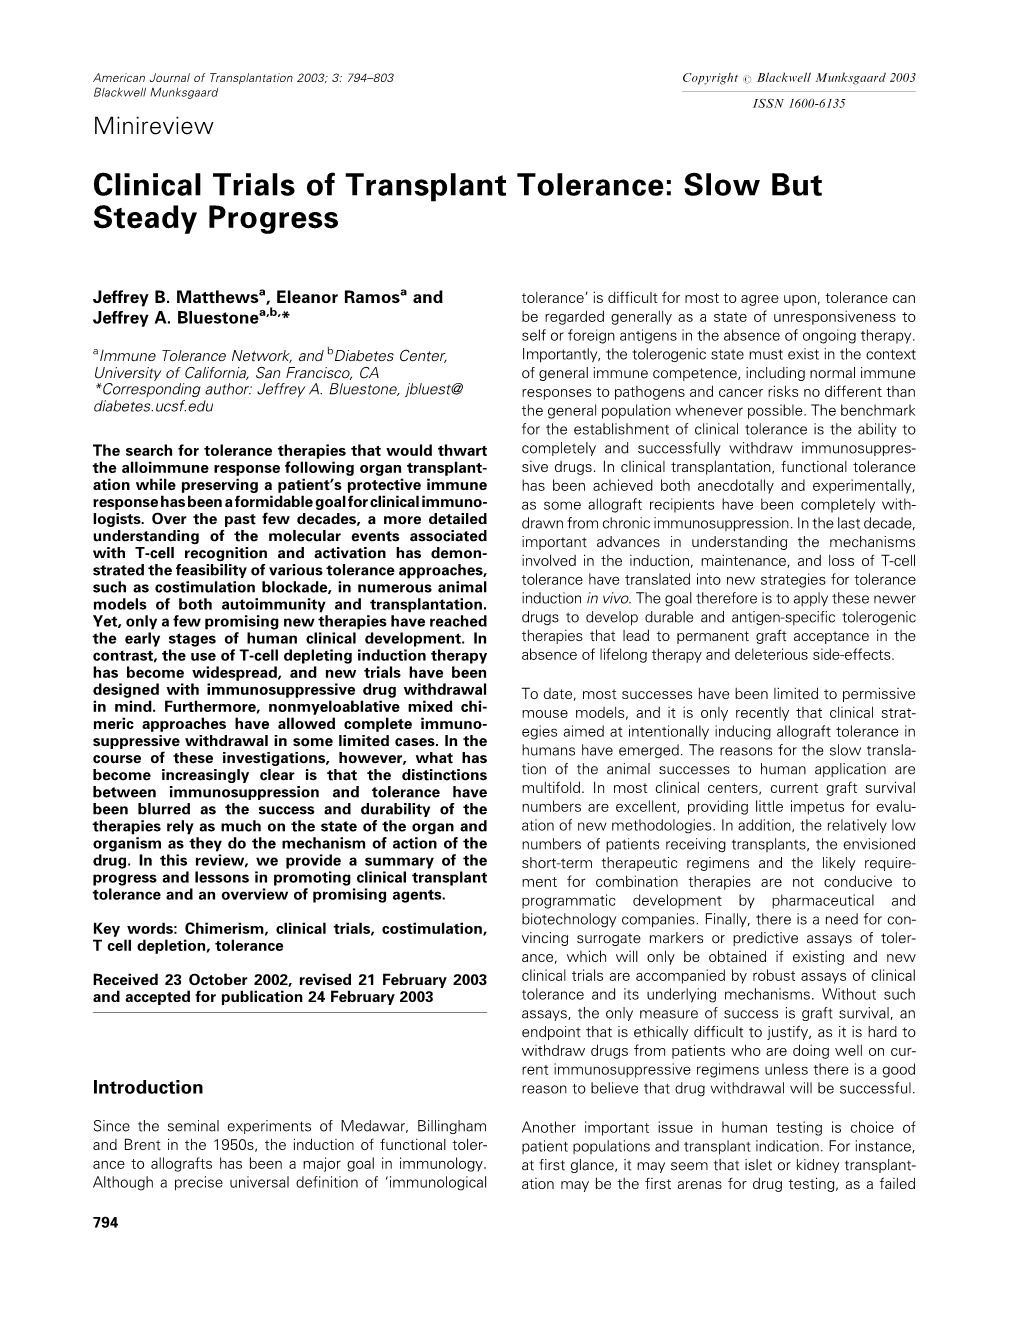 Clinical Trials of Transplant Tolerance: Slow but Steady Progress